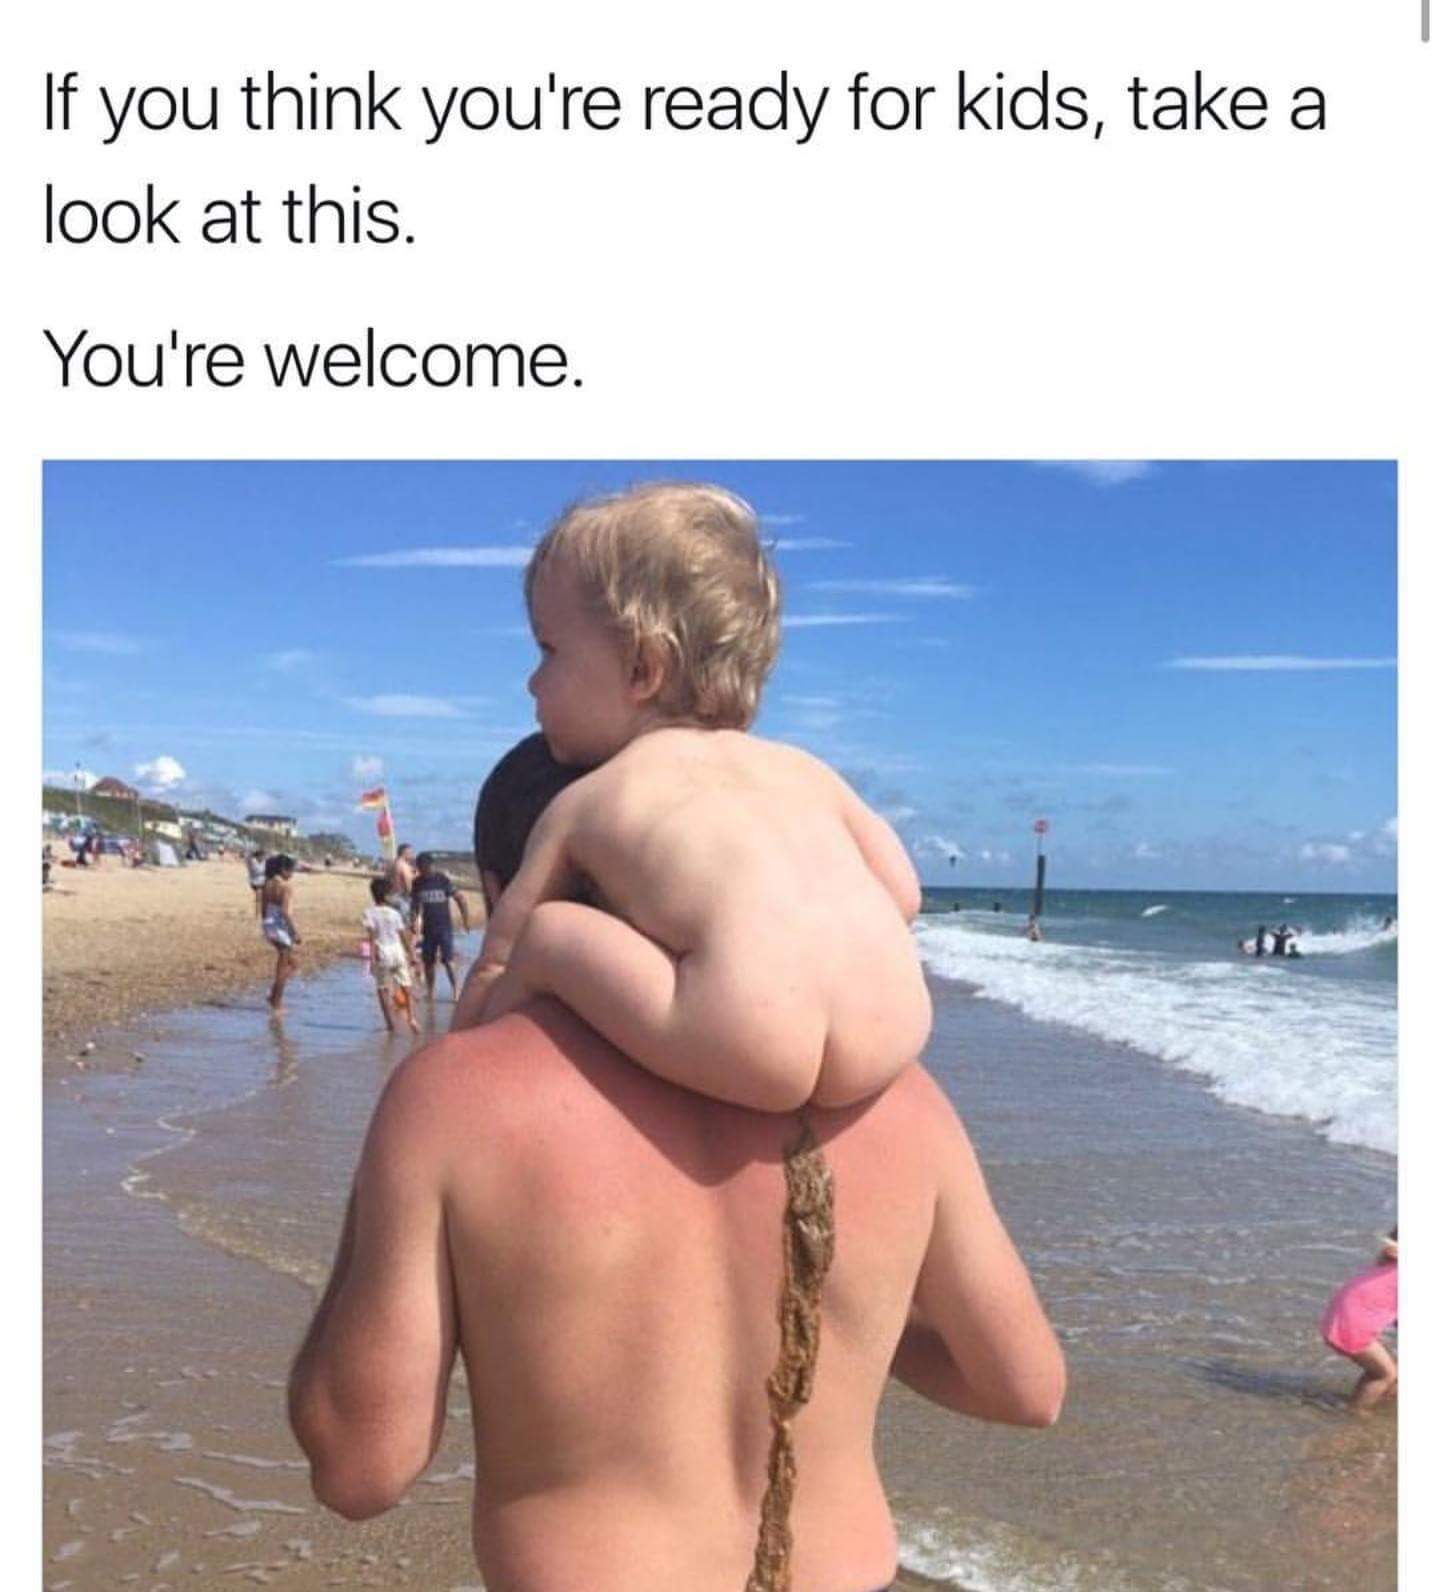 If you think you’re ready for kids…